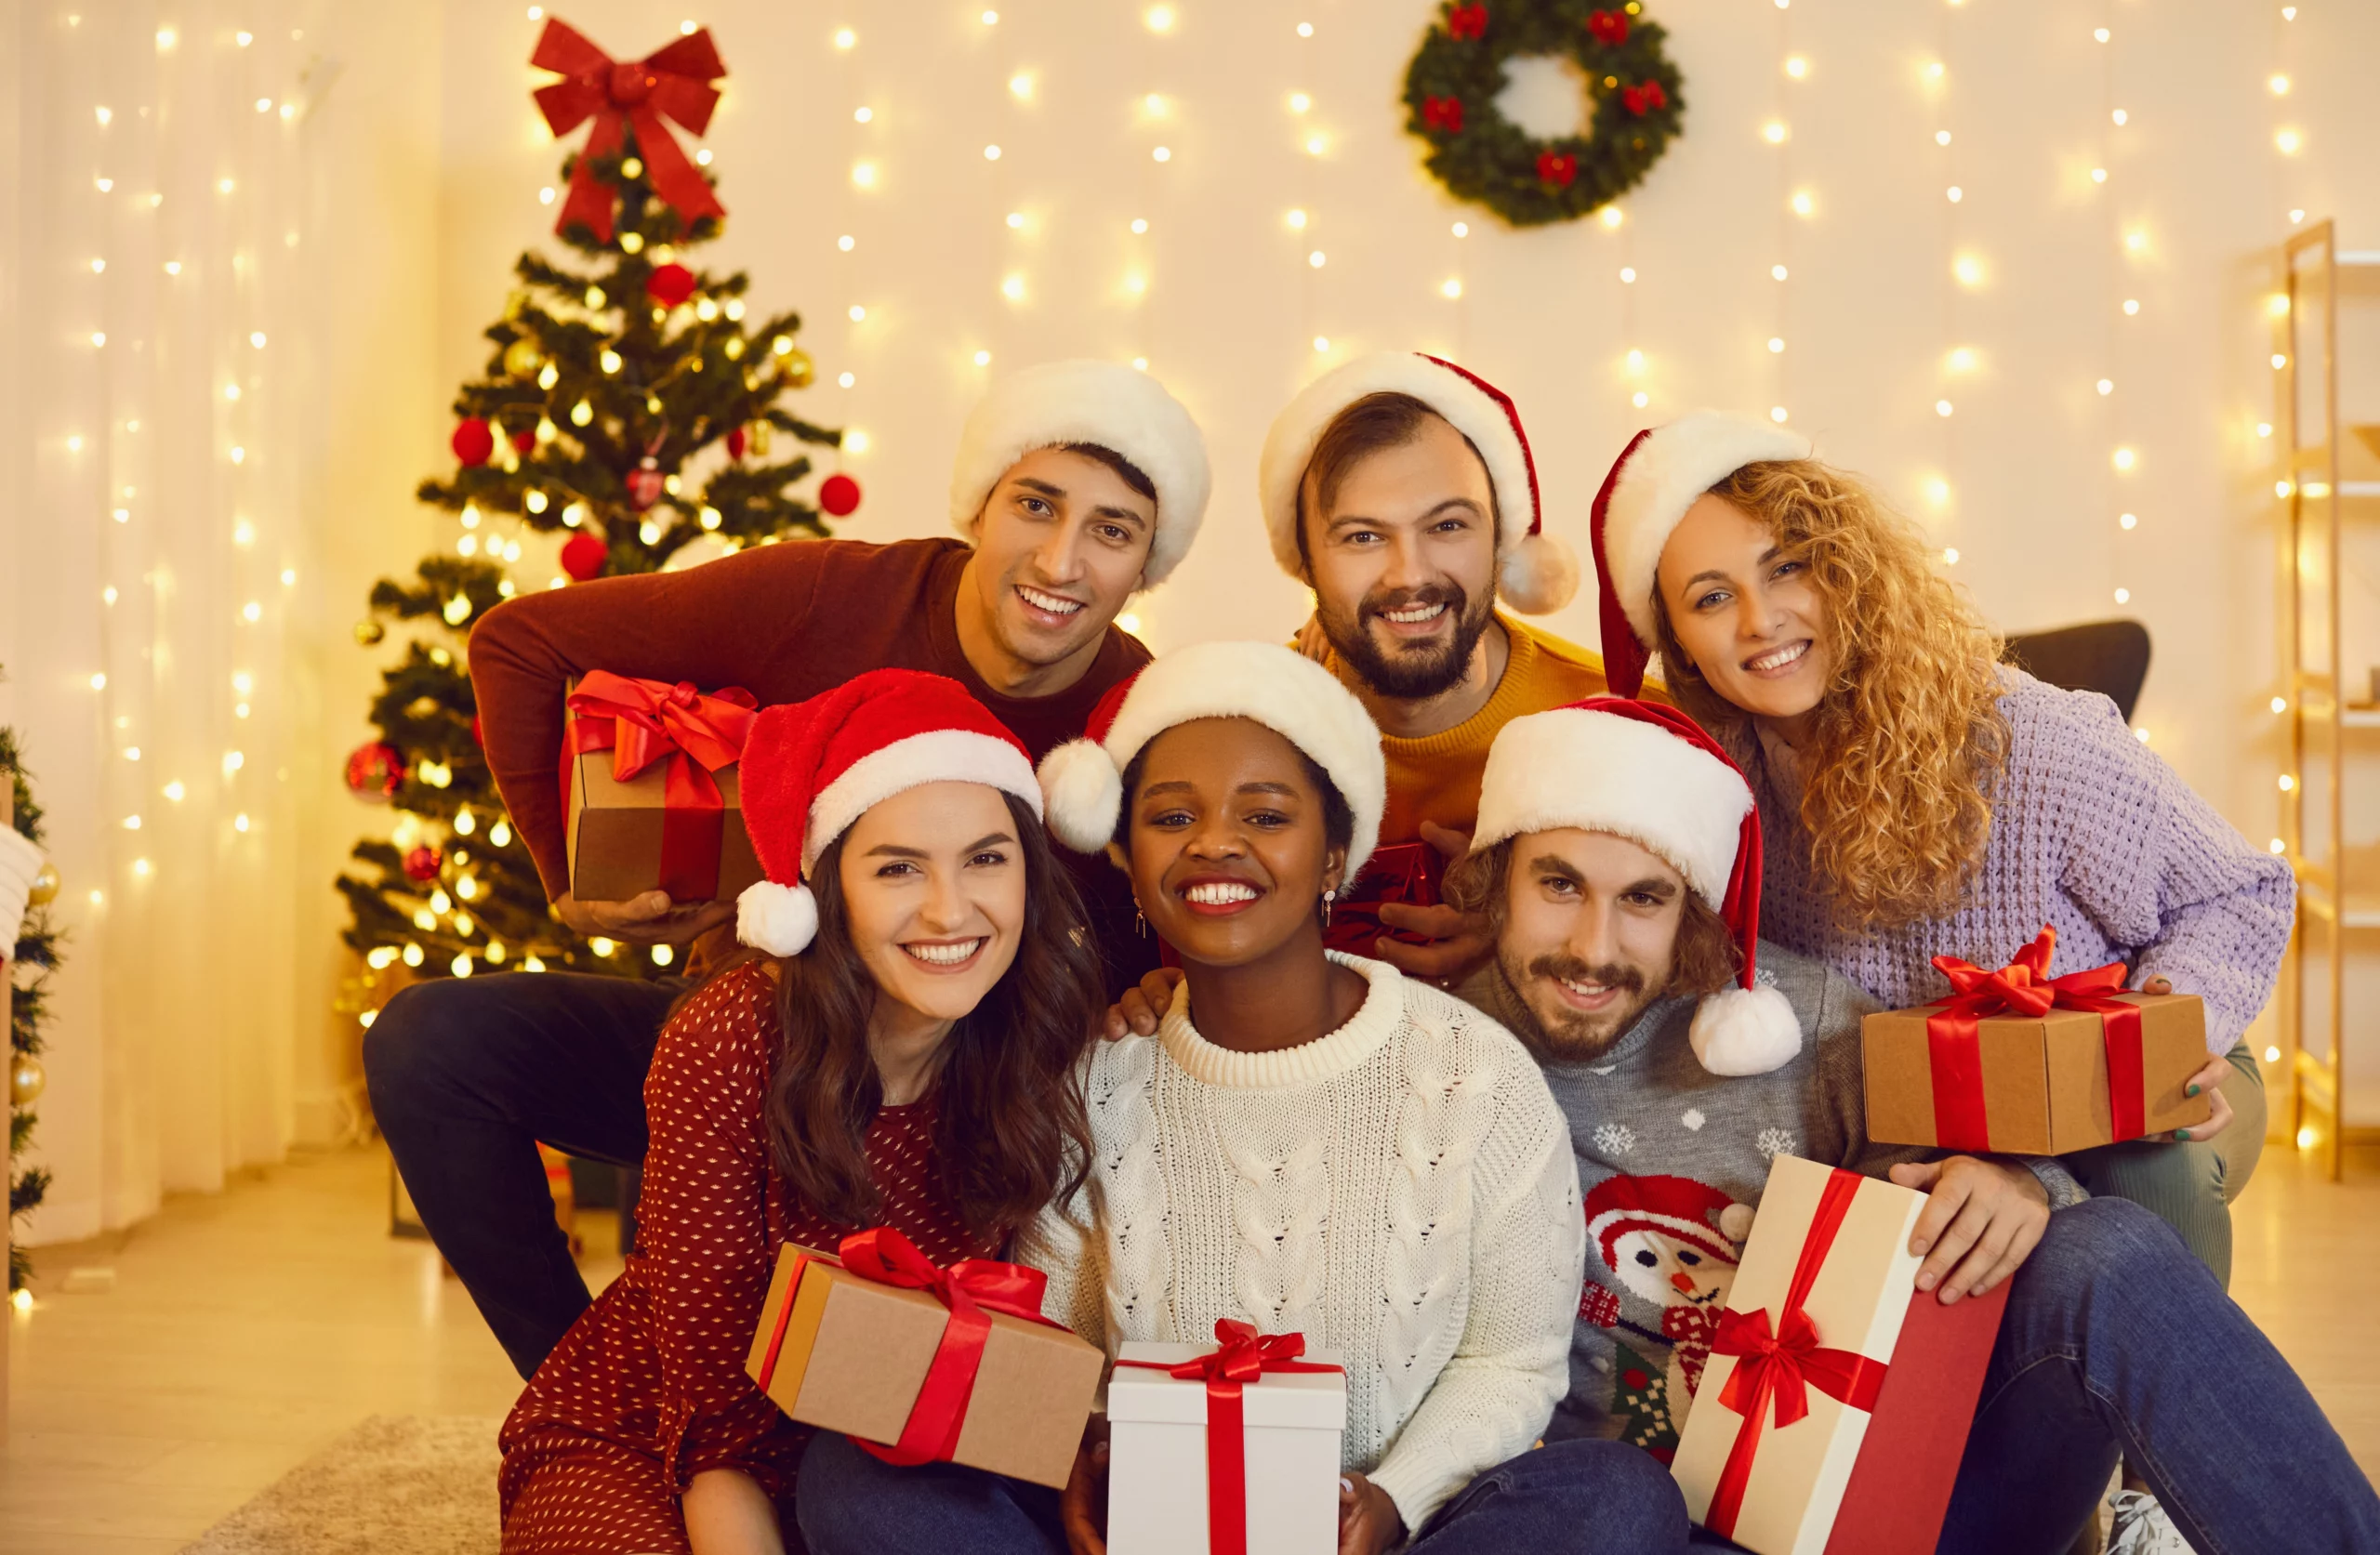 cheap but thoughtful christmas gifts: secret santa for your family | Swoosh Finance